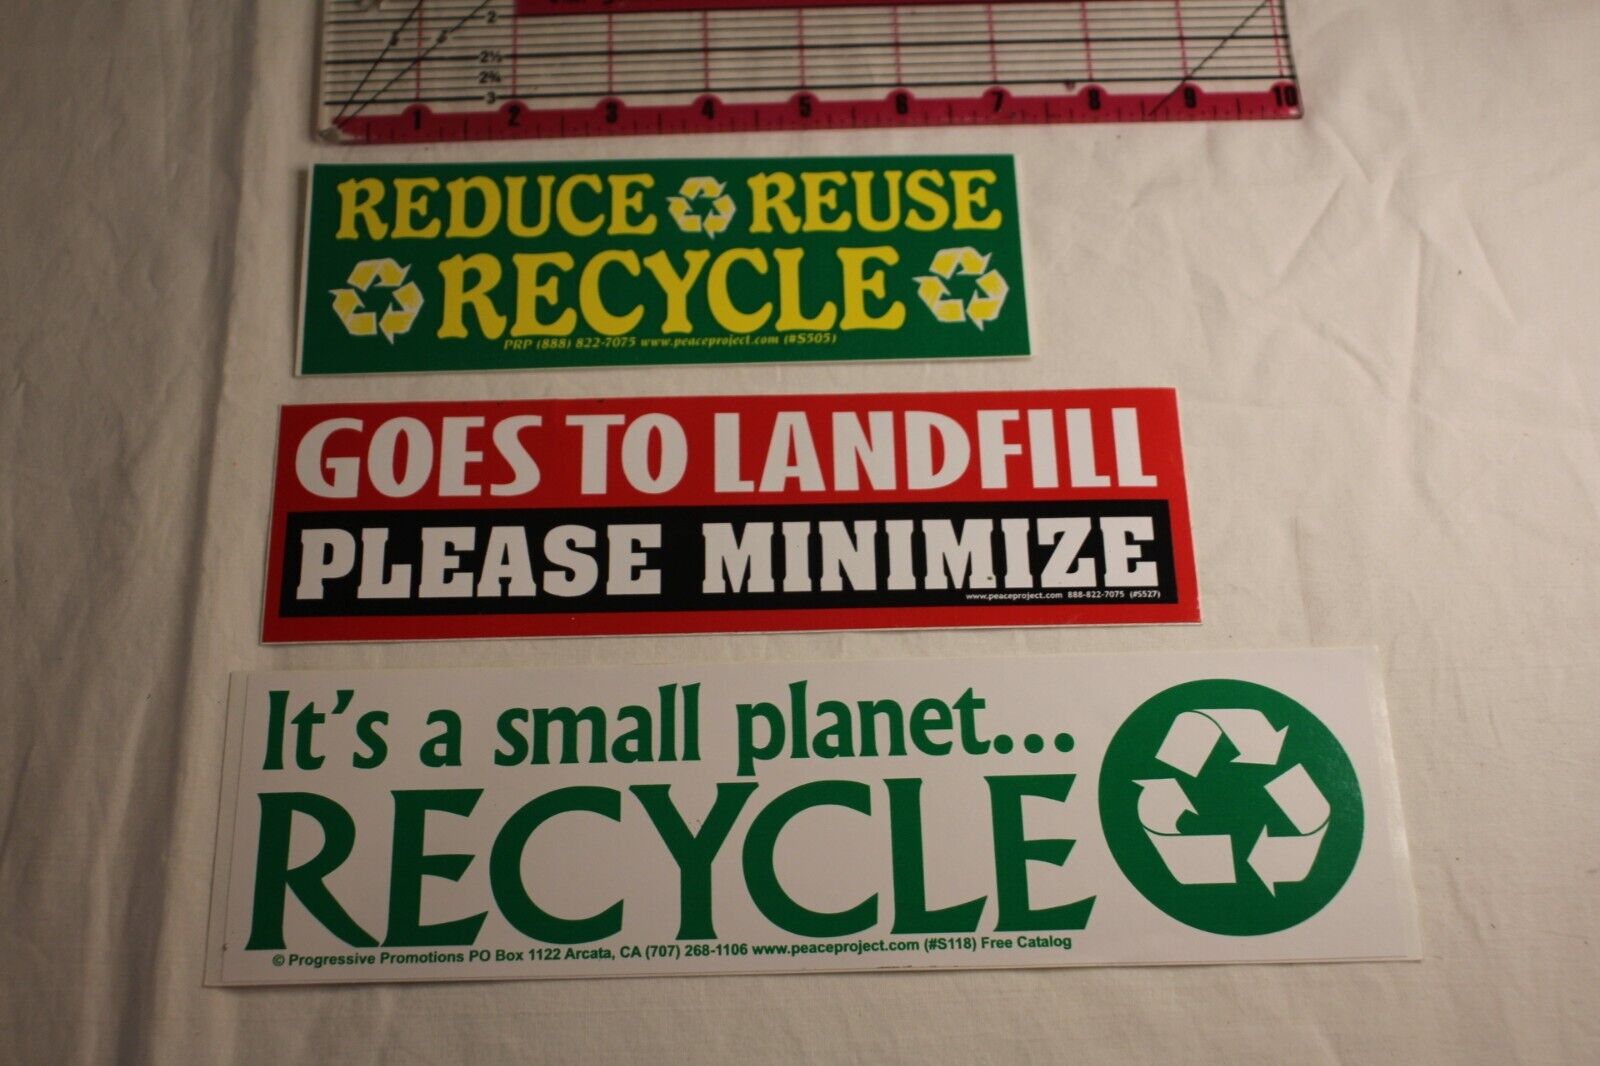 environmental Bumper Sticker lot of 3 it's a small planet recycle, reduce reuse 